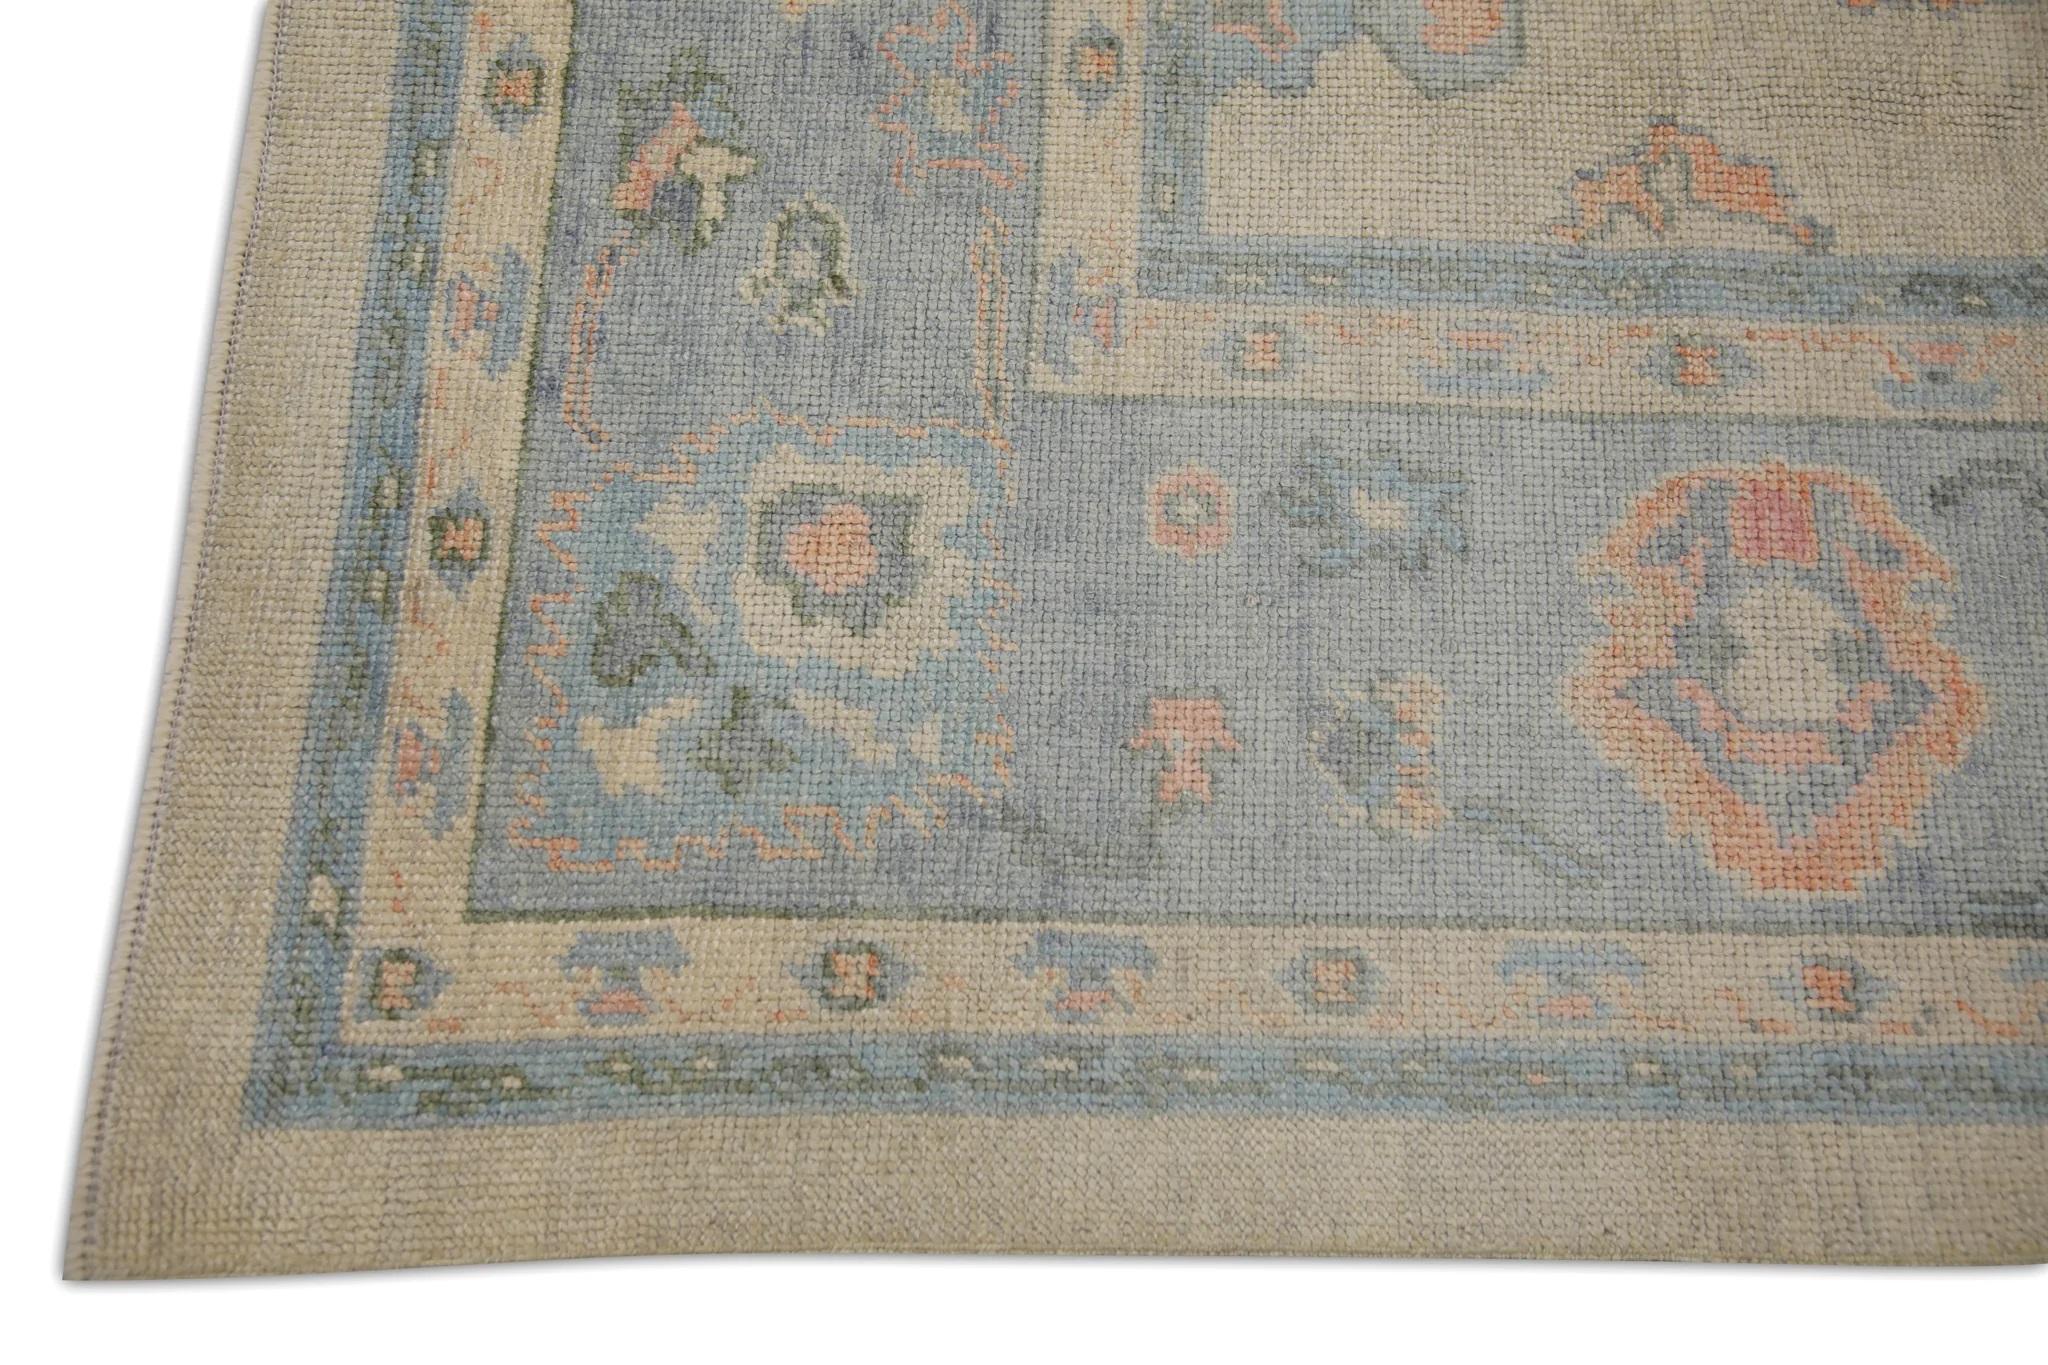 Vegetable Dyed Handwoven Wool Turkish Oushak Rug in Blue & Salmon Floral Pattern 8'3